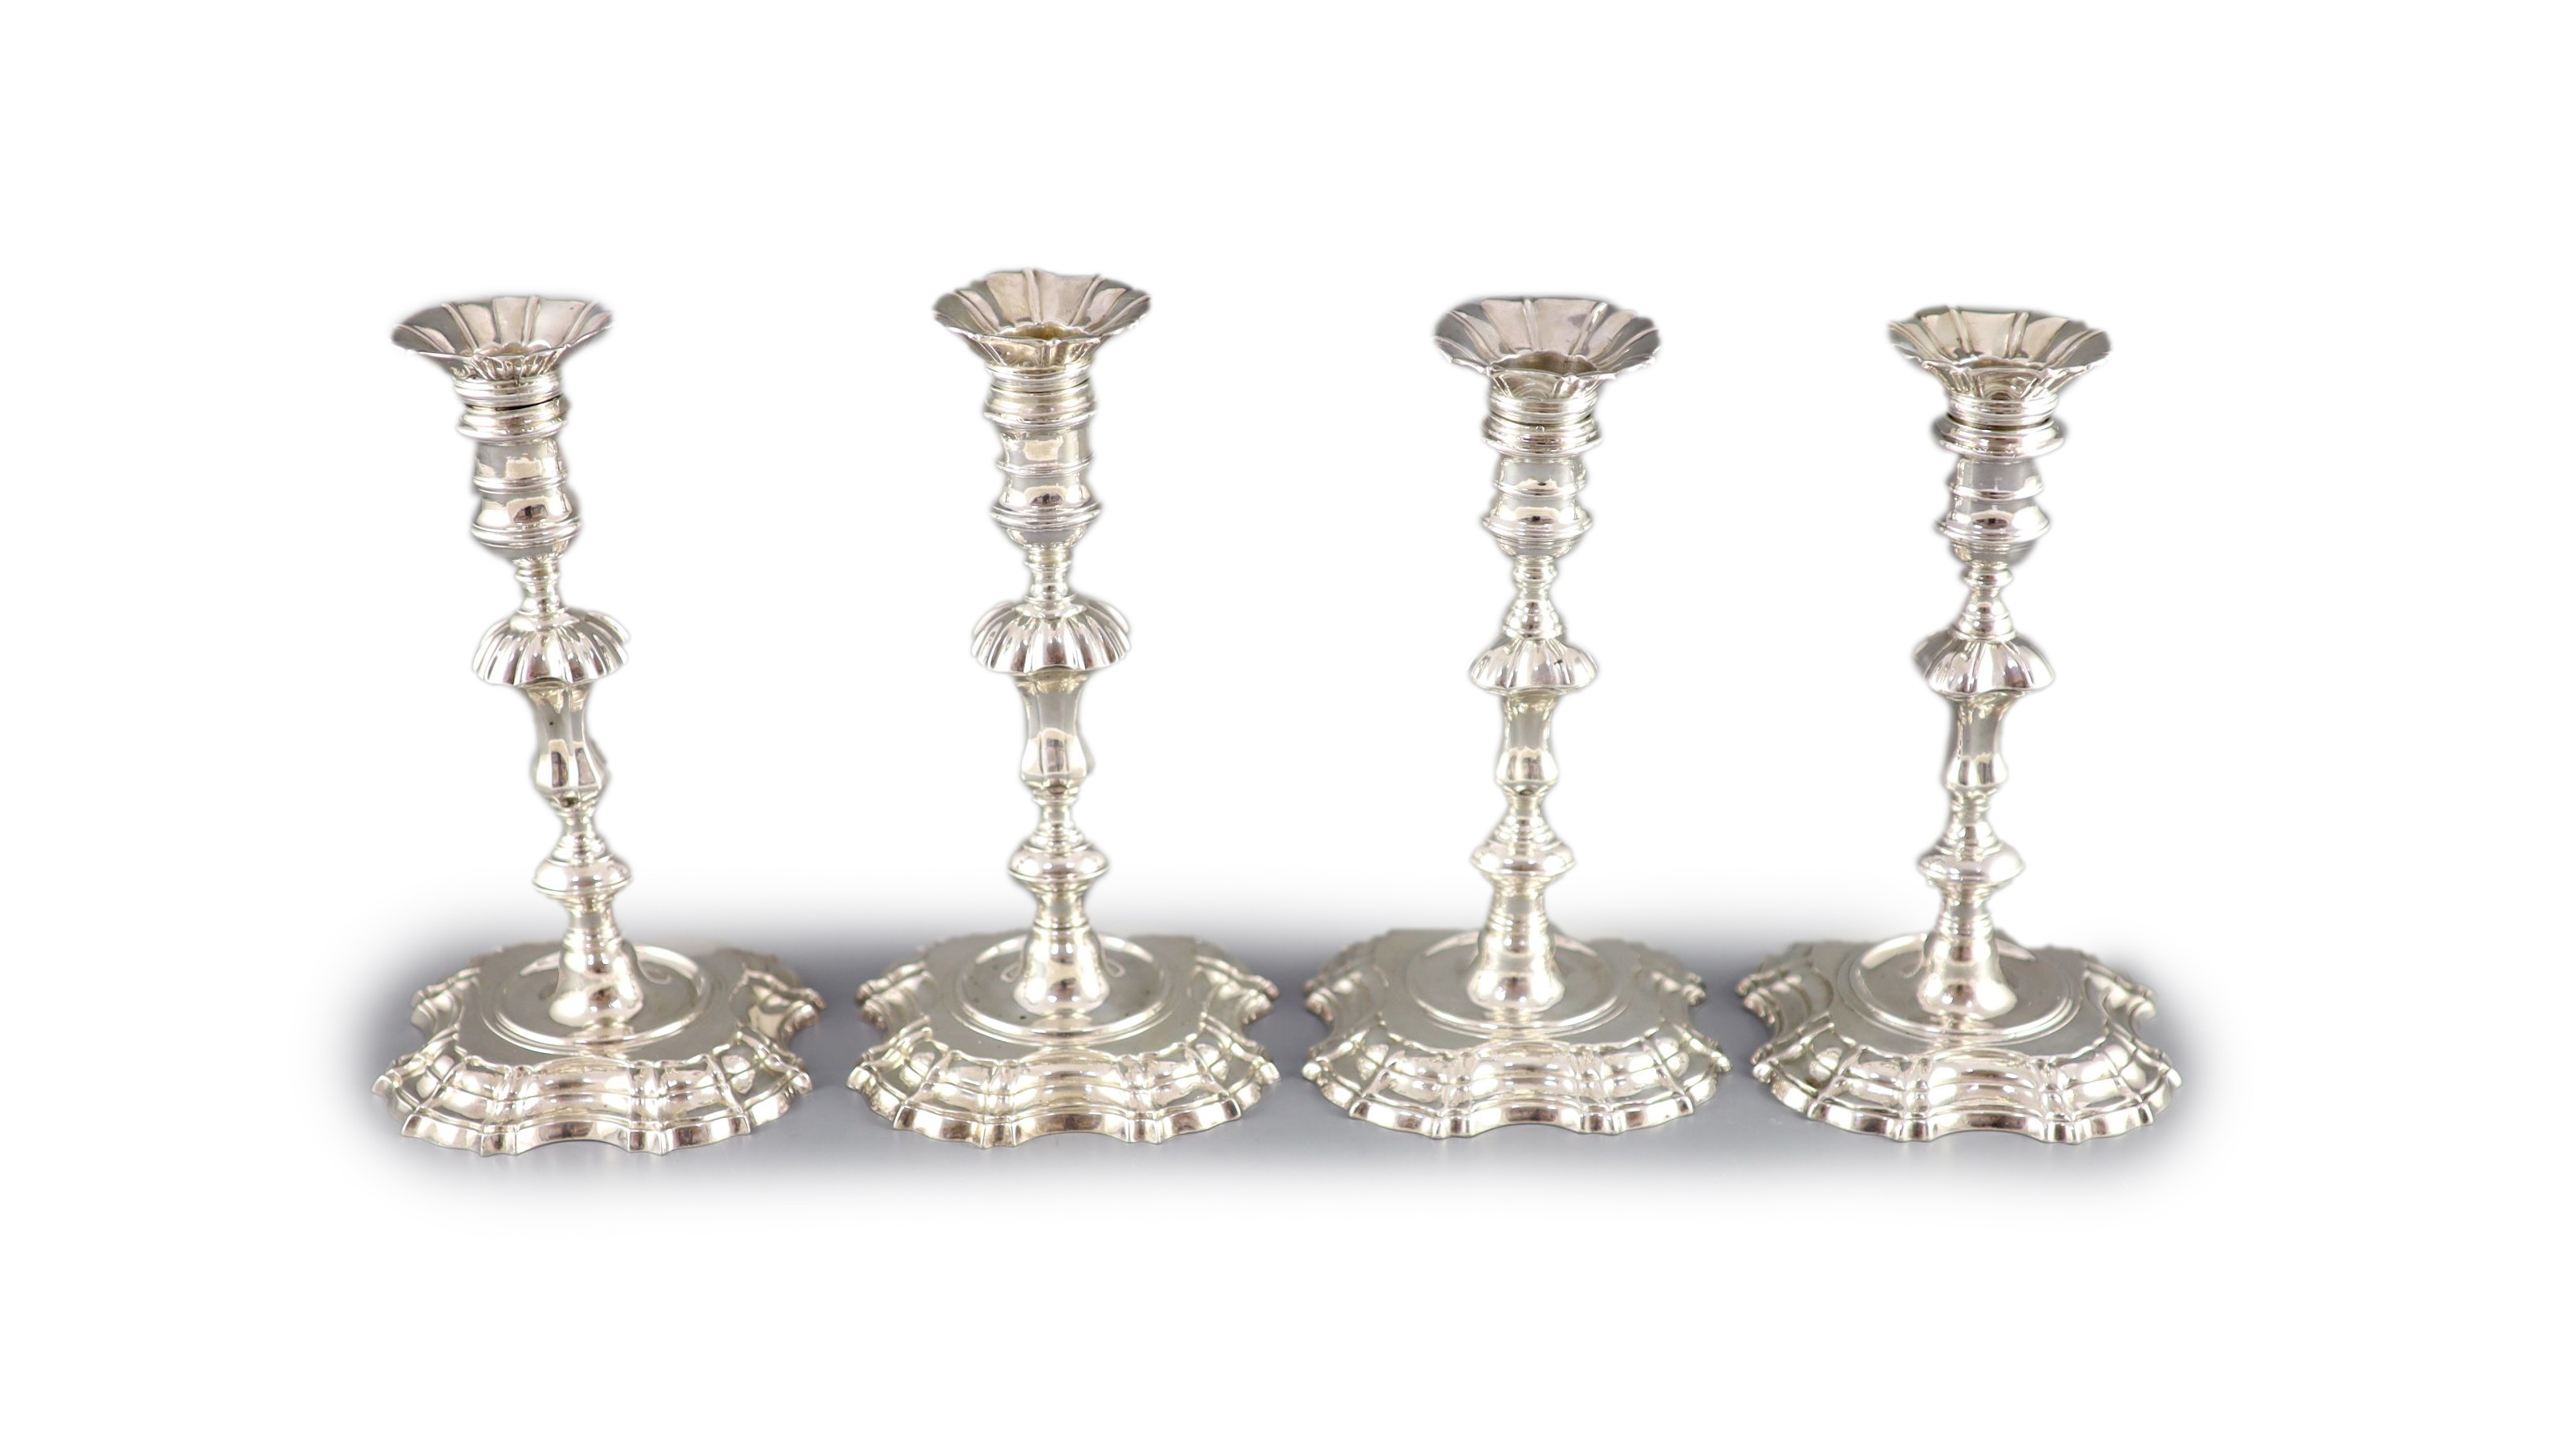 A near set of four George II cast silver candlesticks, by John Cafe